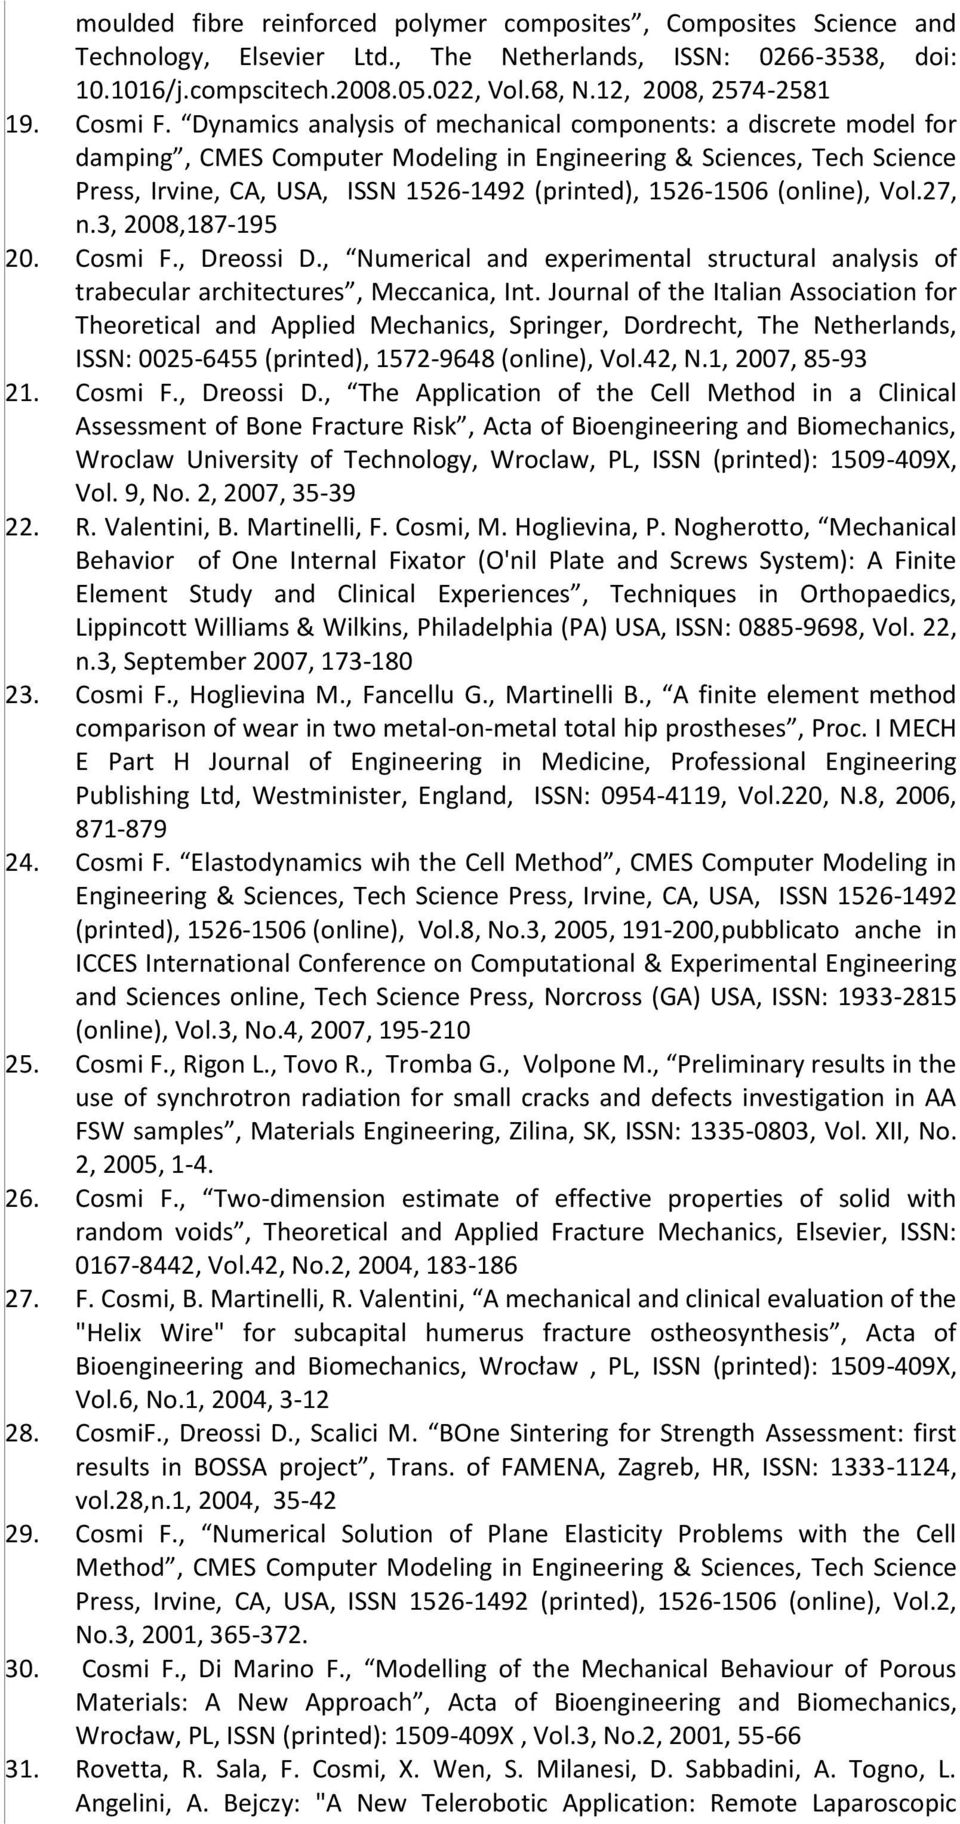 Dynamics analysis of mechanical components: a discrete model for damping, CMES Computer Modeling in Engineering & Sciences, Tech Science Press, Irvine, CA, USA, ISSN 1526-1492 (printed), 1526-1506